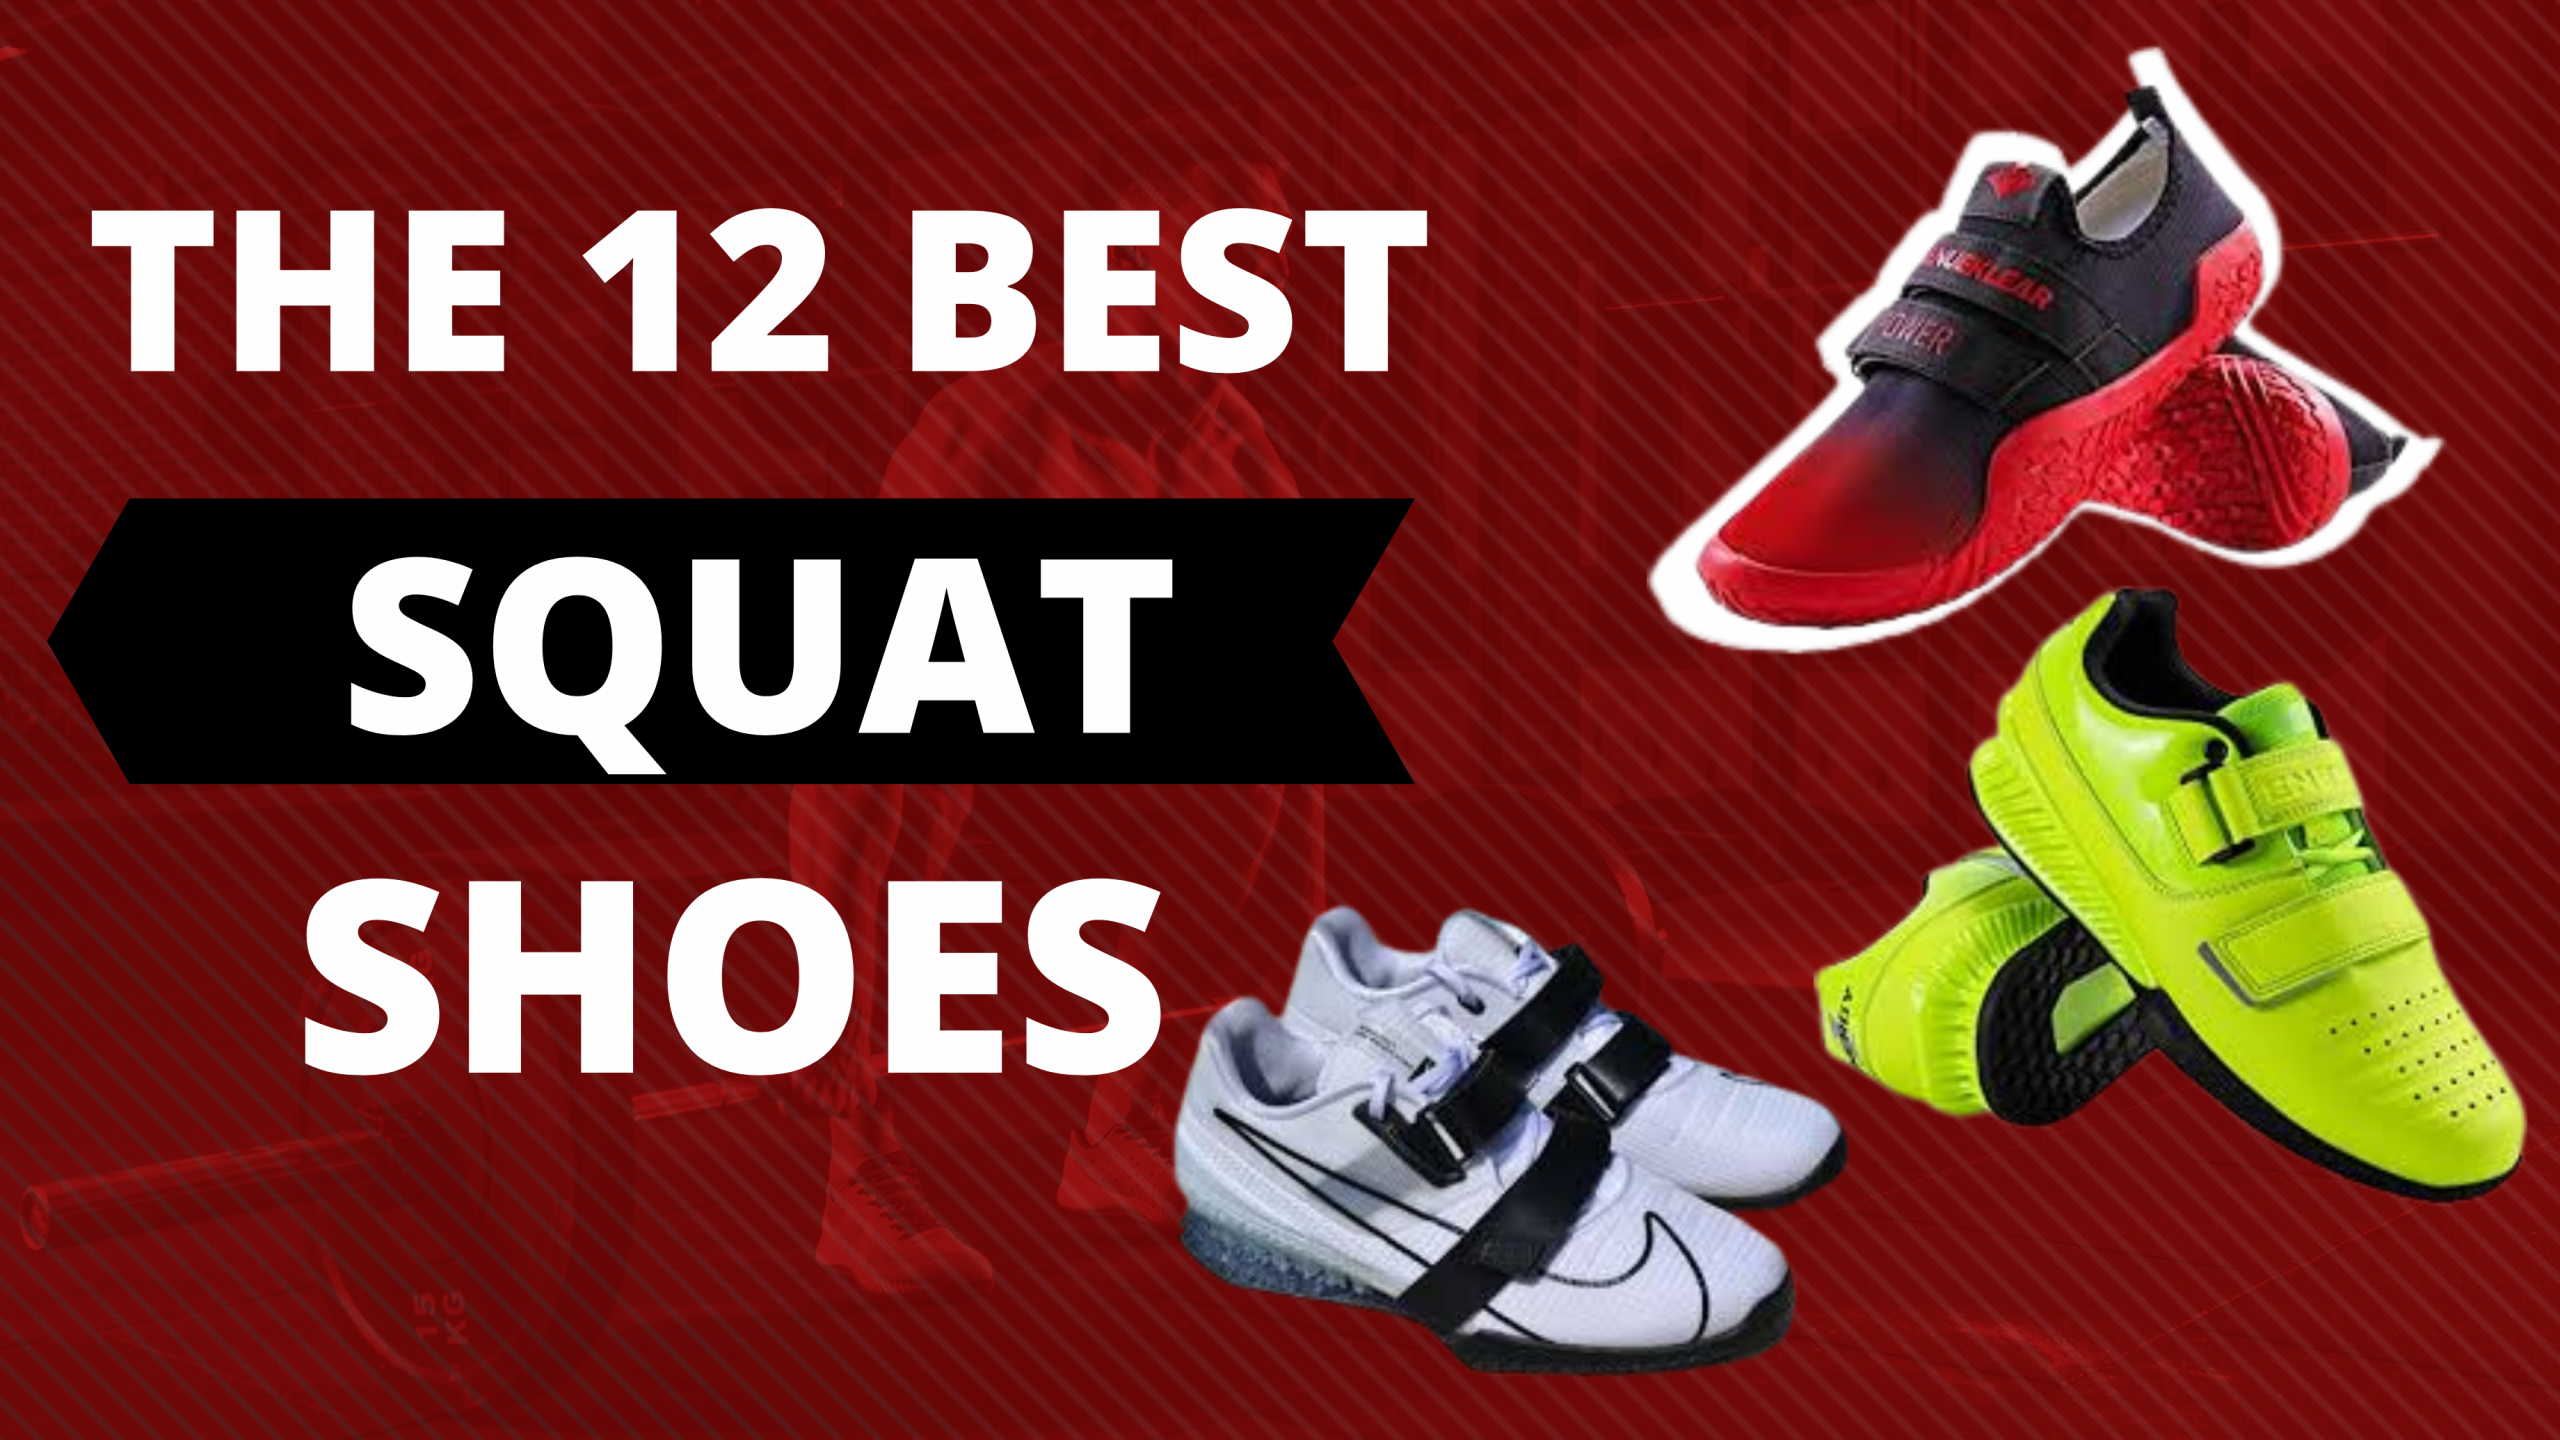 The 12 Best Squat Shoes in 2023 - A Buying Guide